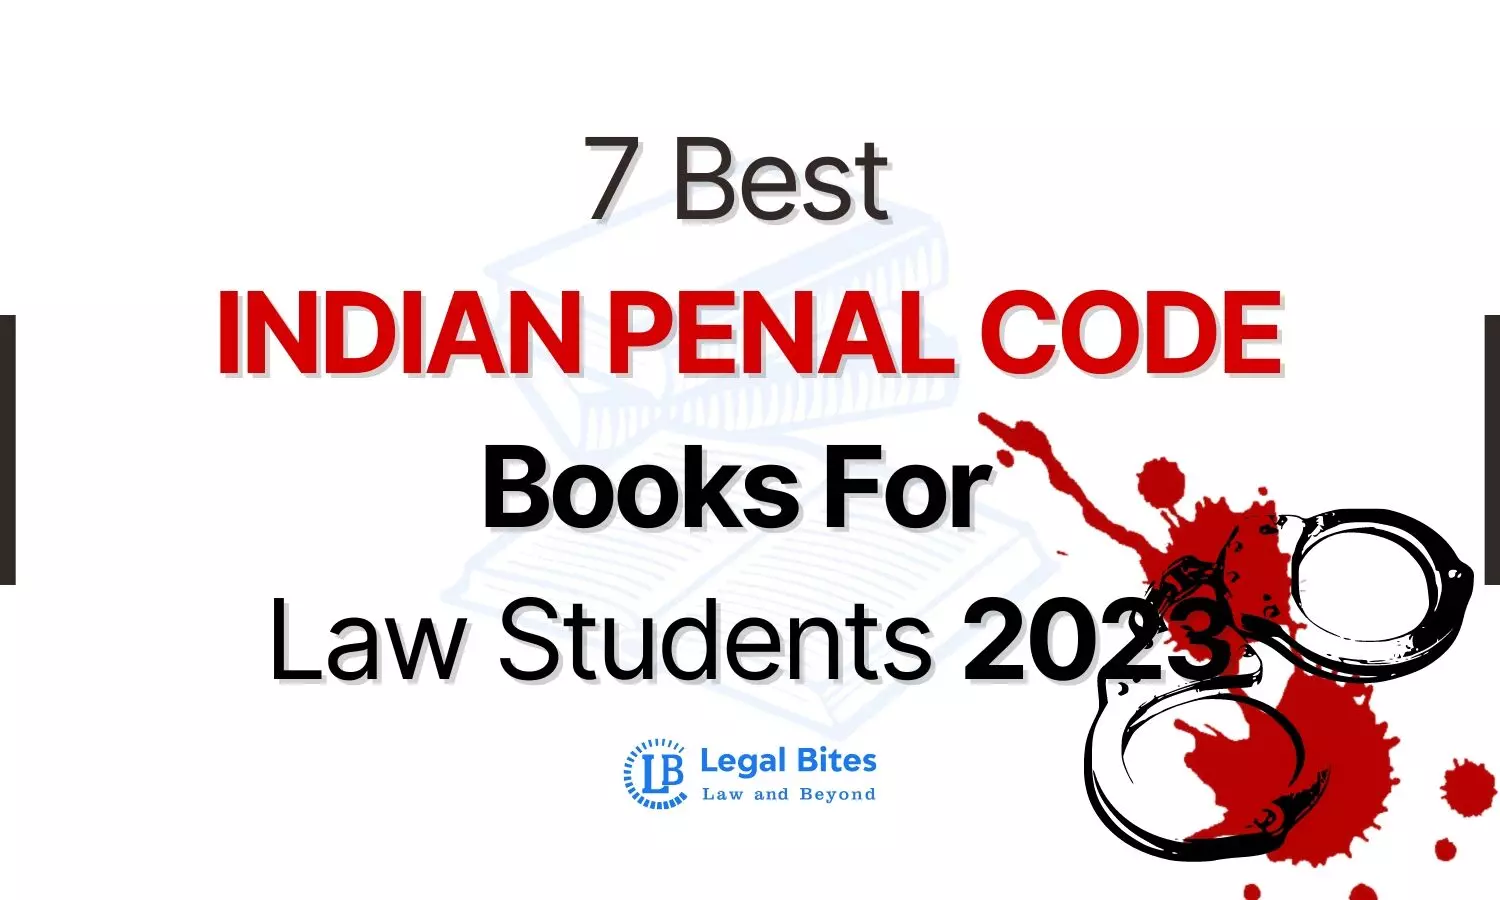 7 Best Indian Penal Code Books For Law Students 2023